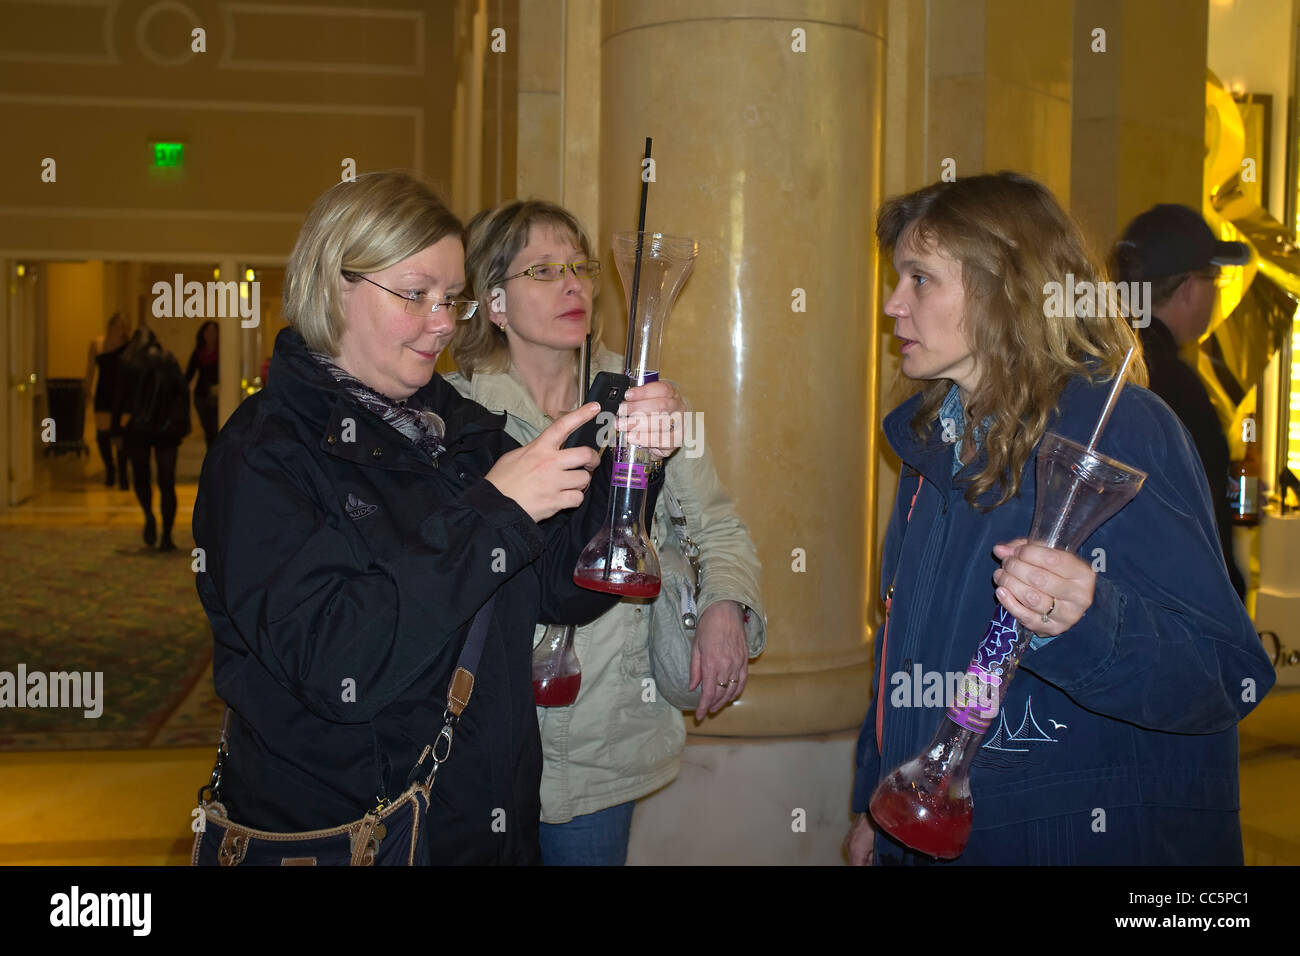 Three women with daiquiri vases enjoying Las Vegas nightlife in front of the Monte Carlo Hotel Stock Photo